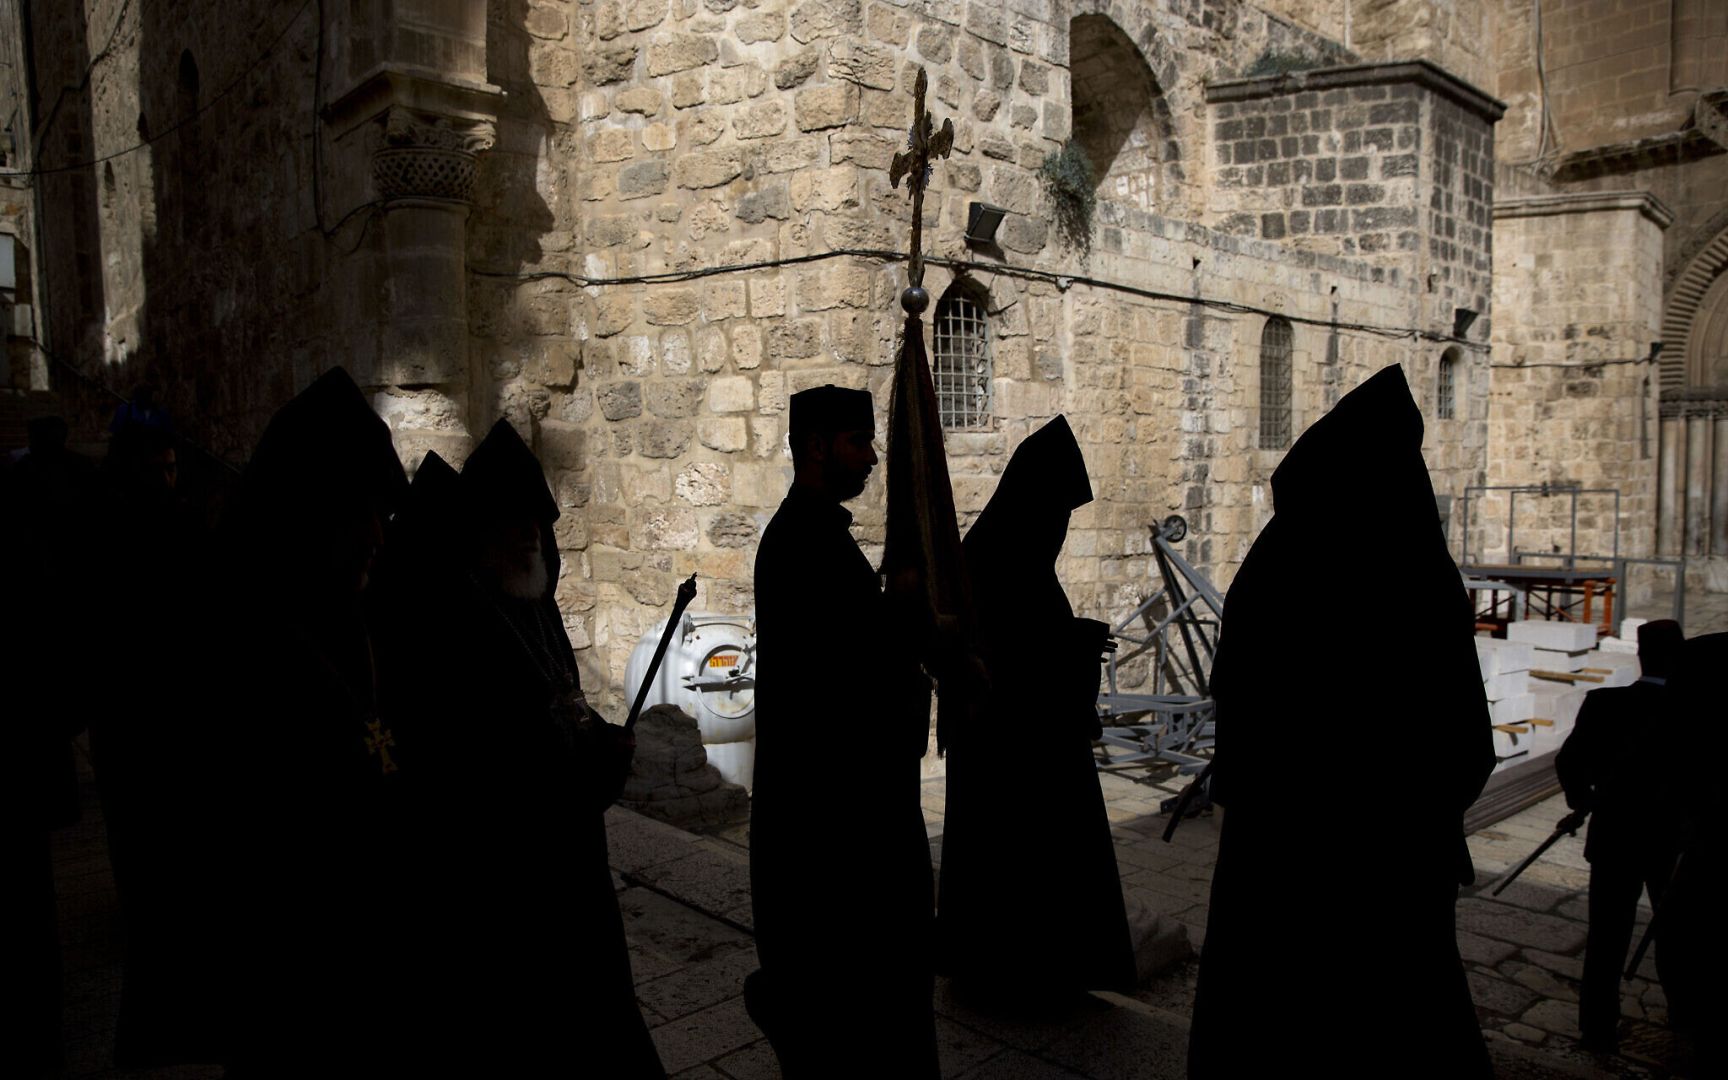 Media reveals business of Armenian cleric hiding in shadow